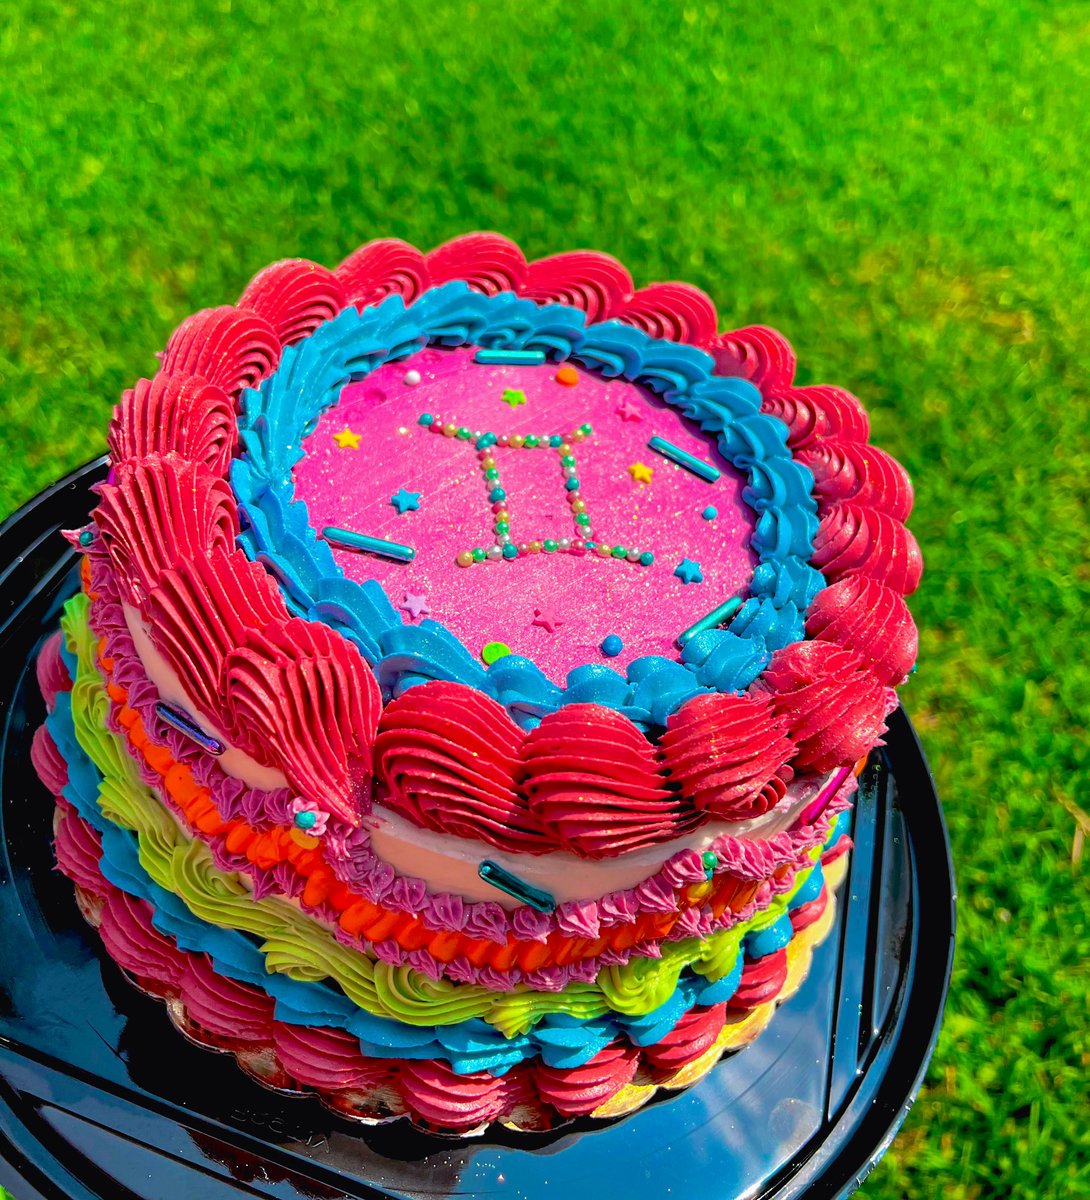 Y’ALL—my birthday cake is so 𝗣𝗥𝗘𝗧𝗧𝗬. (I did the Gemini beading and sprinkles myself)